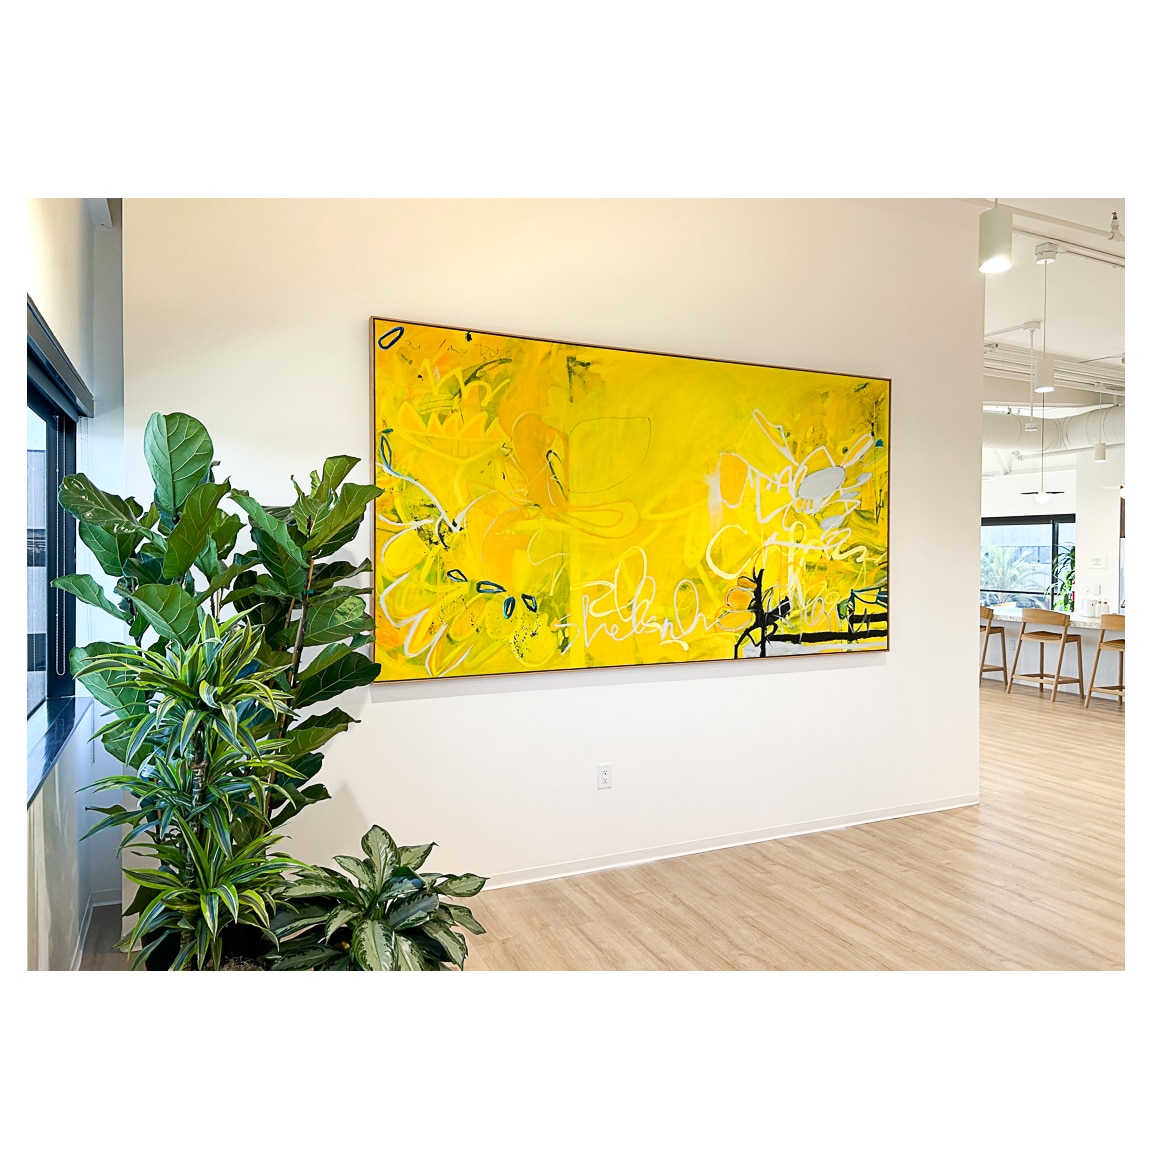 Large yellow urban abstract painting corporate install SUN 2 ig